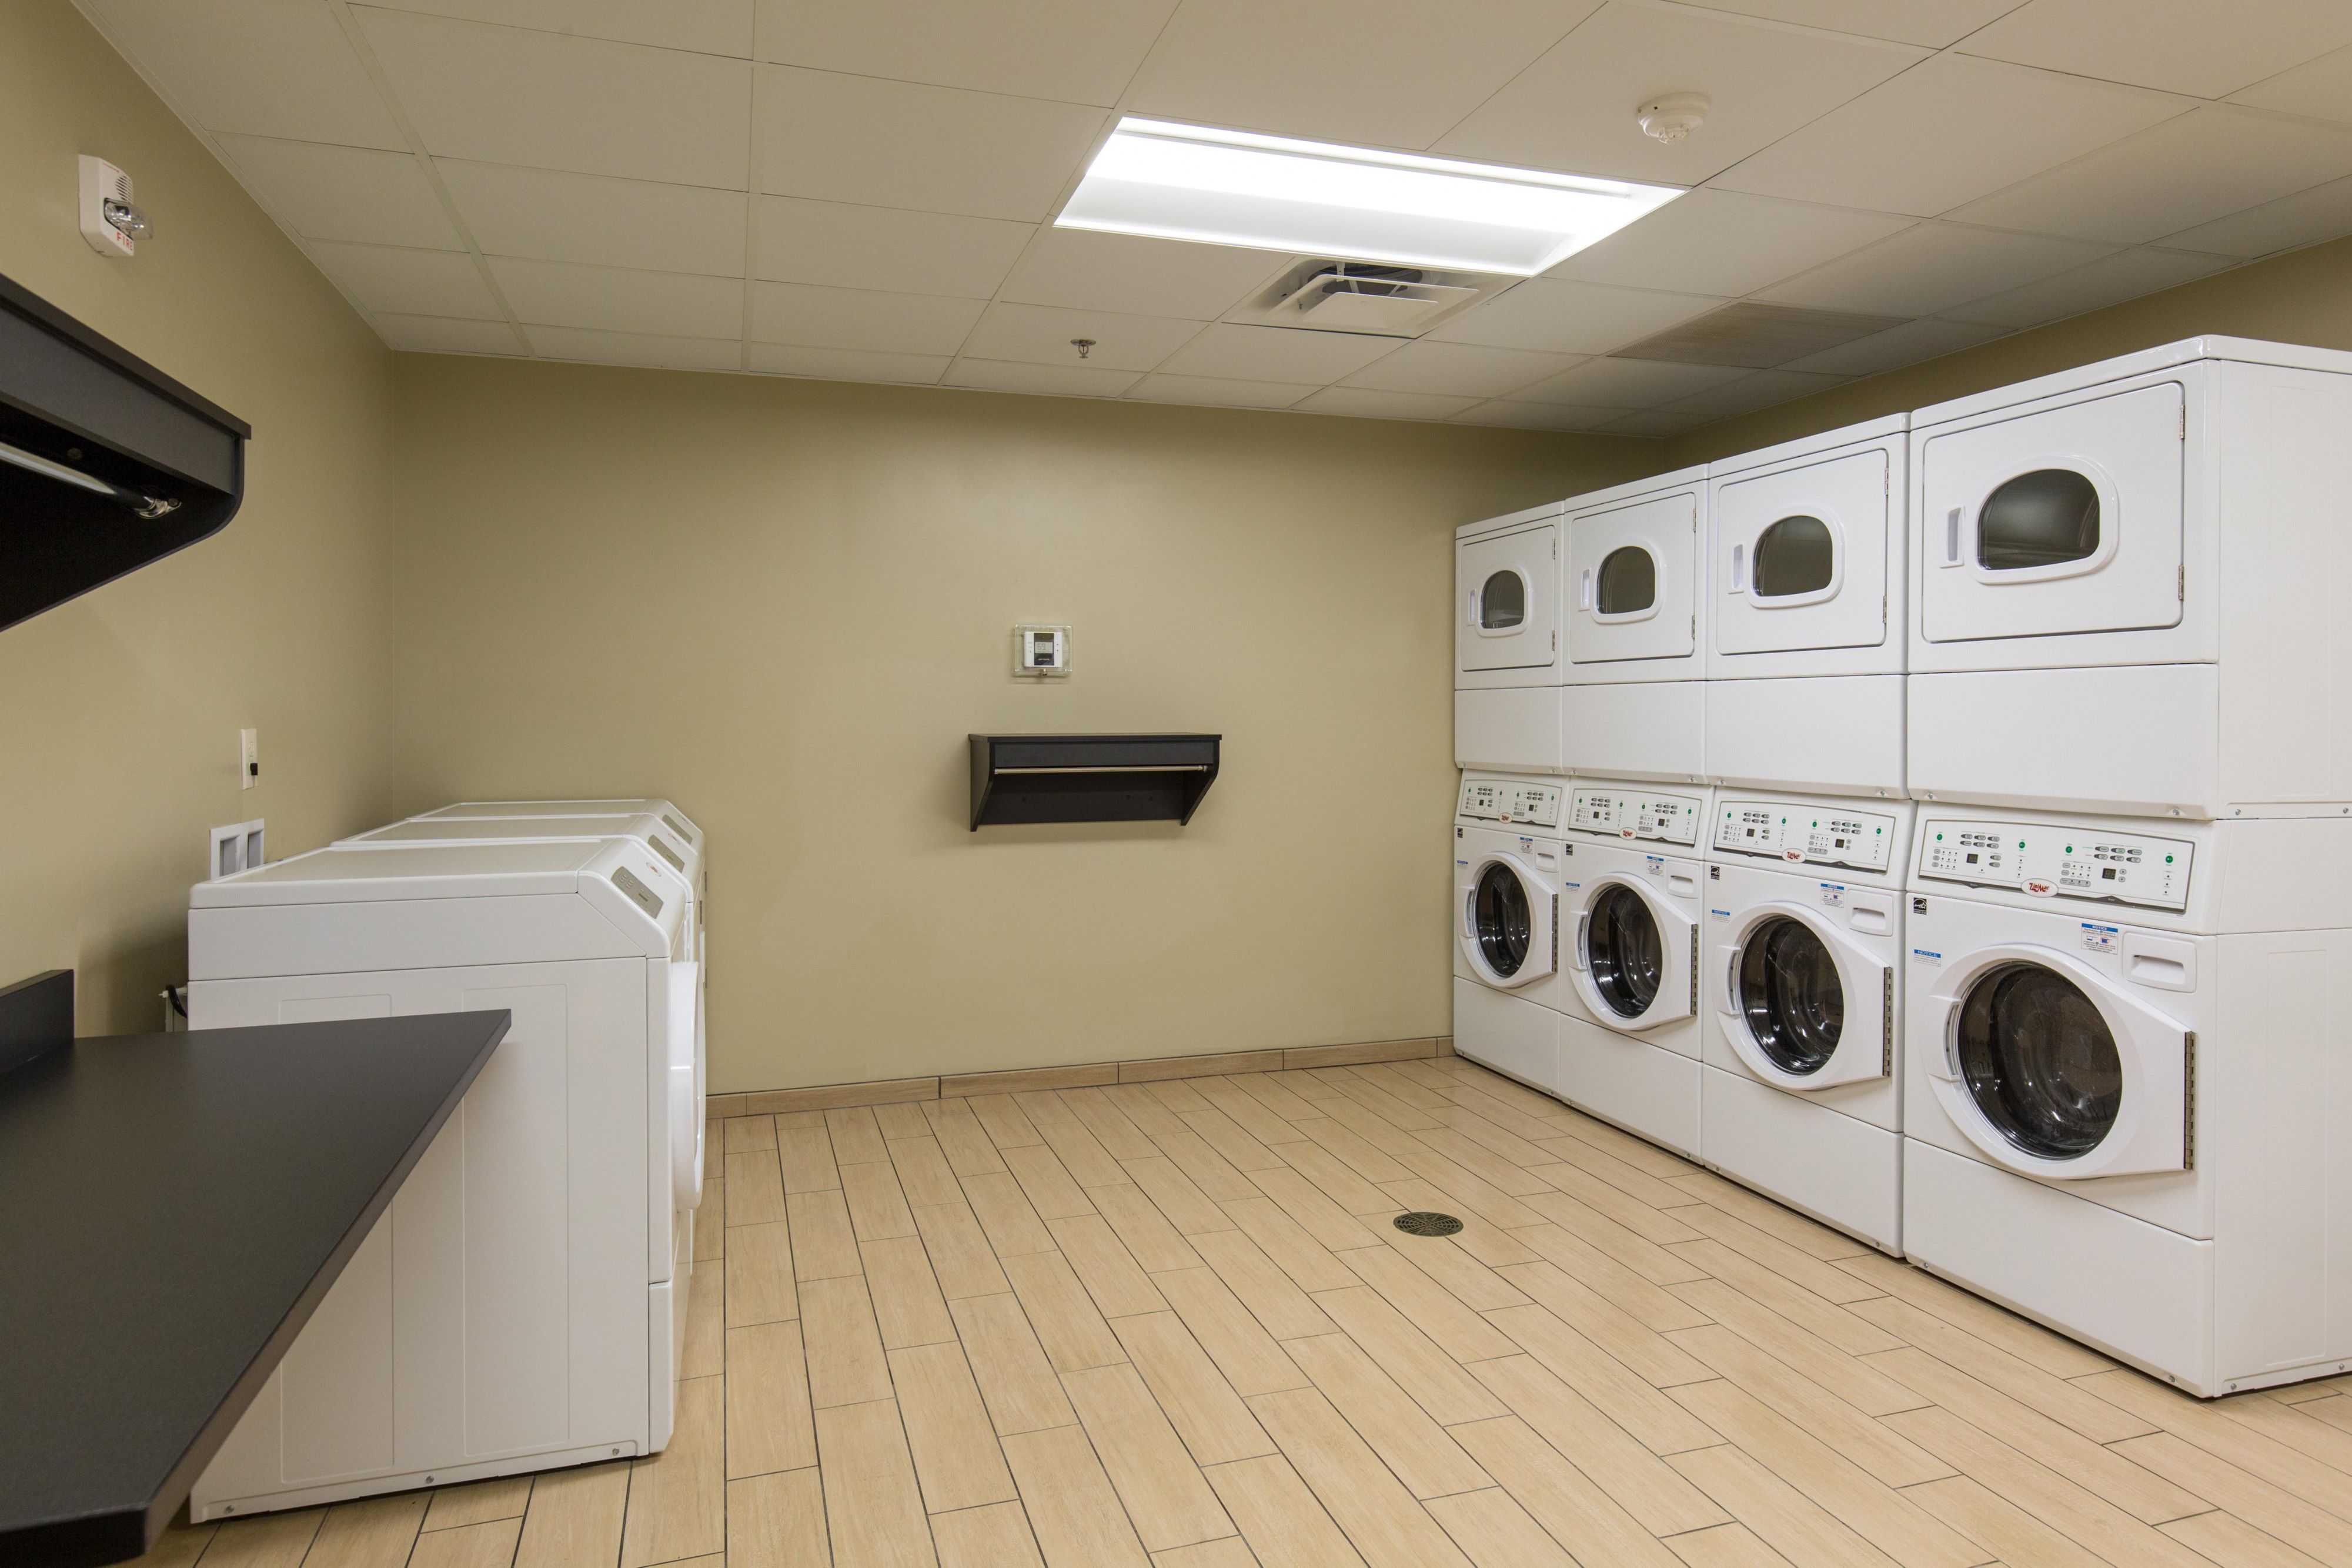 24/7 Free On-site Guest self–laundry facility.  We offer Dry Cleaning Pickup/Laundry same day services. Light cleaning daily with full service cleaning weekly or upon request.